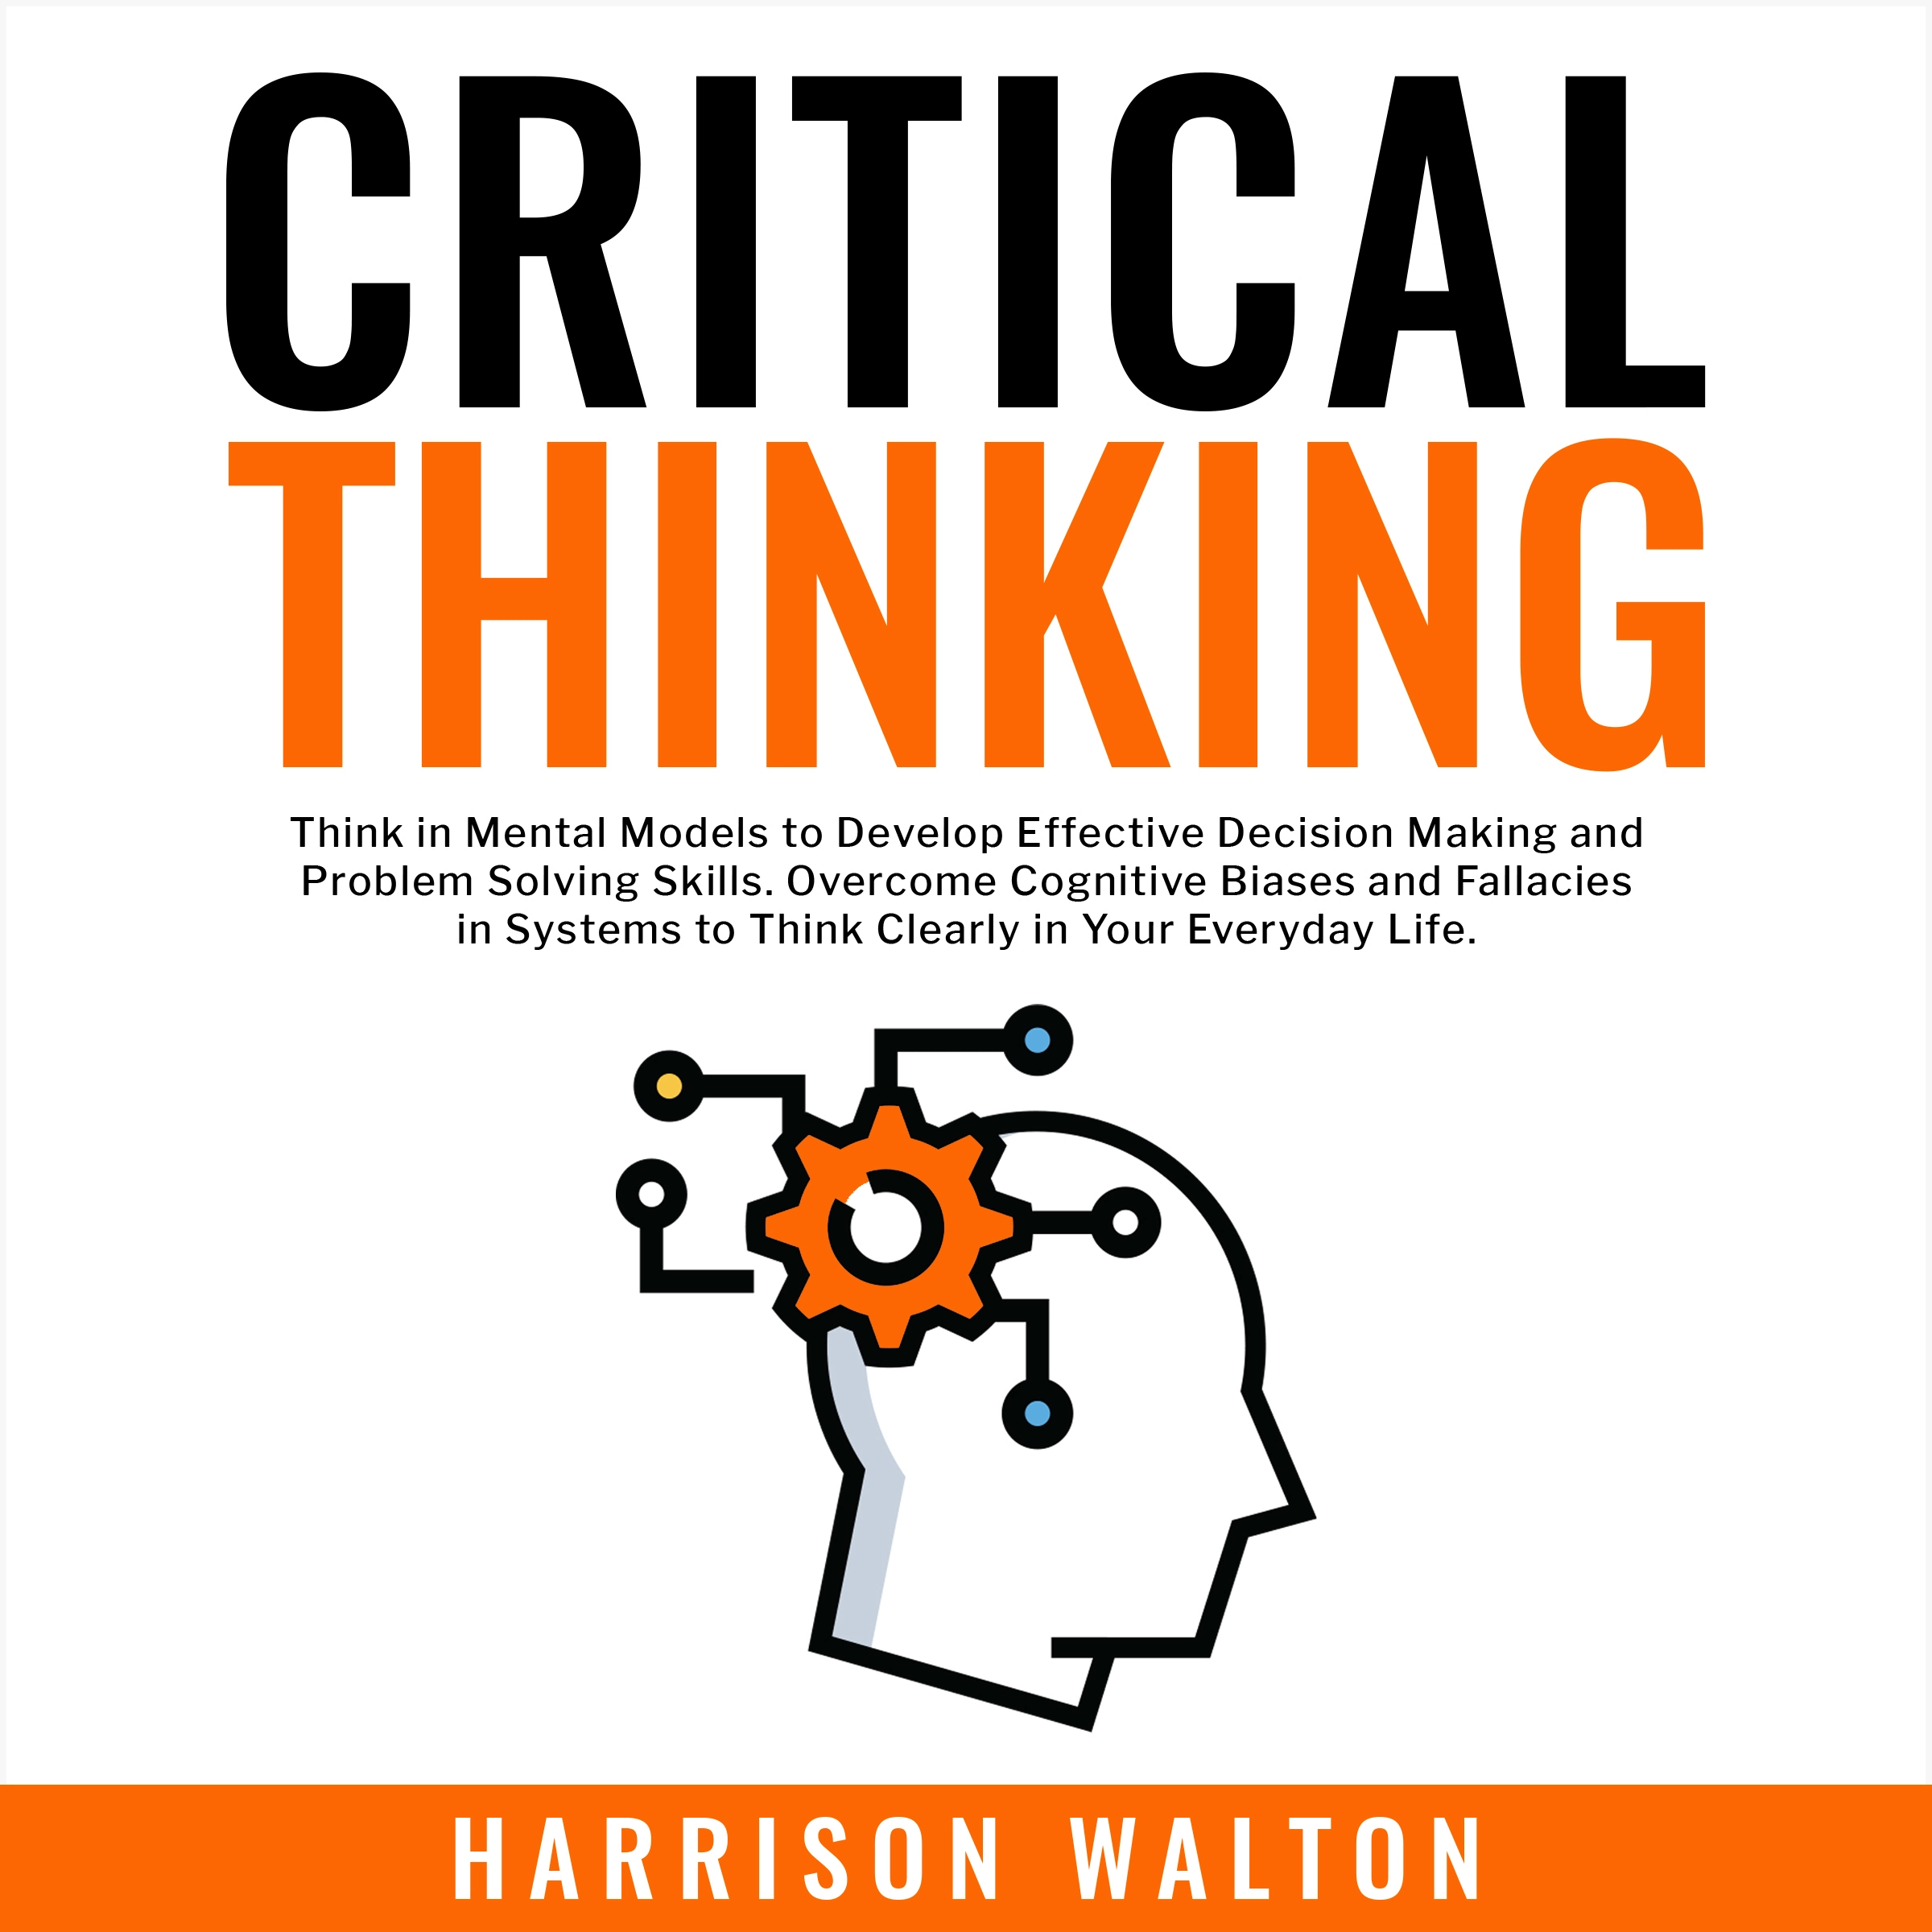 Critical Thinking: Think in Mental Models to Develop Effective Decision Making and Problem Solving Skills. Overcome Cognitive Biases and Fallacies in Systems to Think Clearly in Your Everyday Life. Audiobook by Harrison Walton